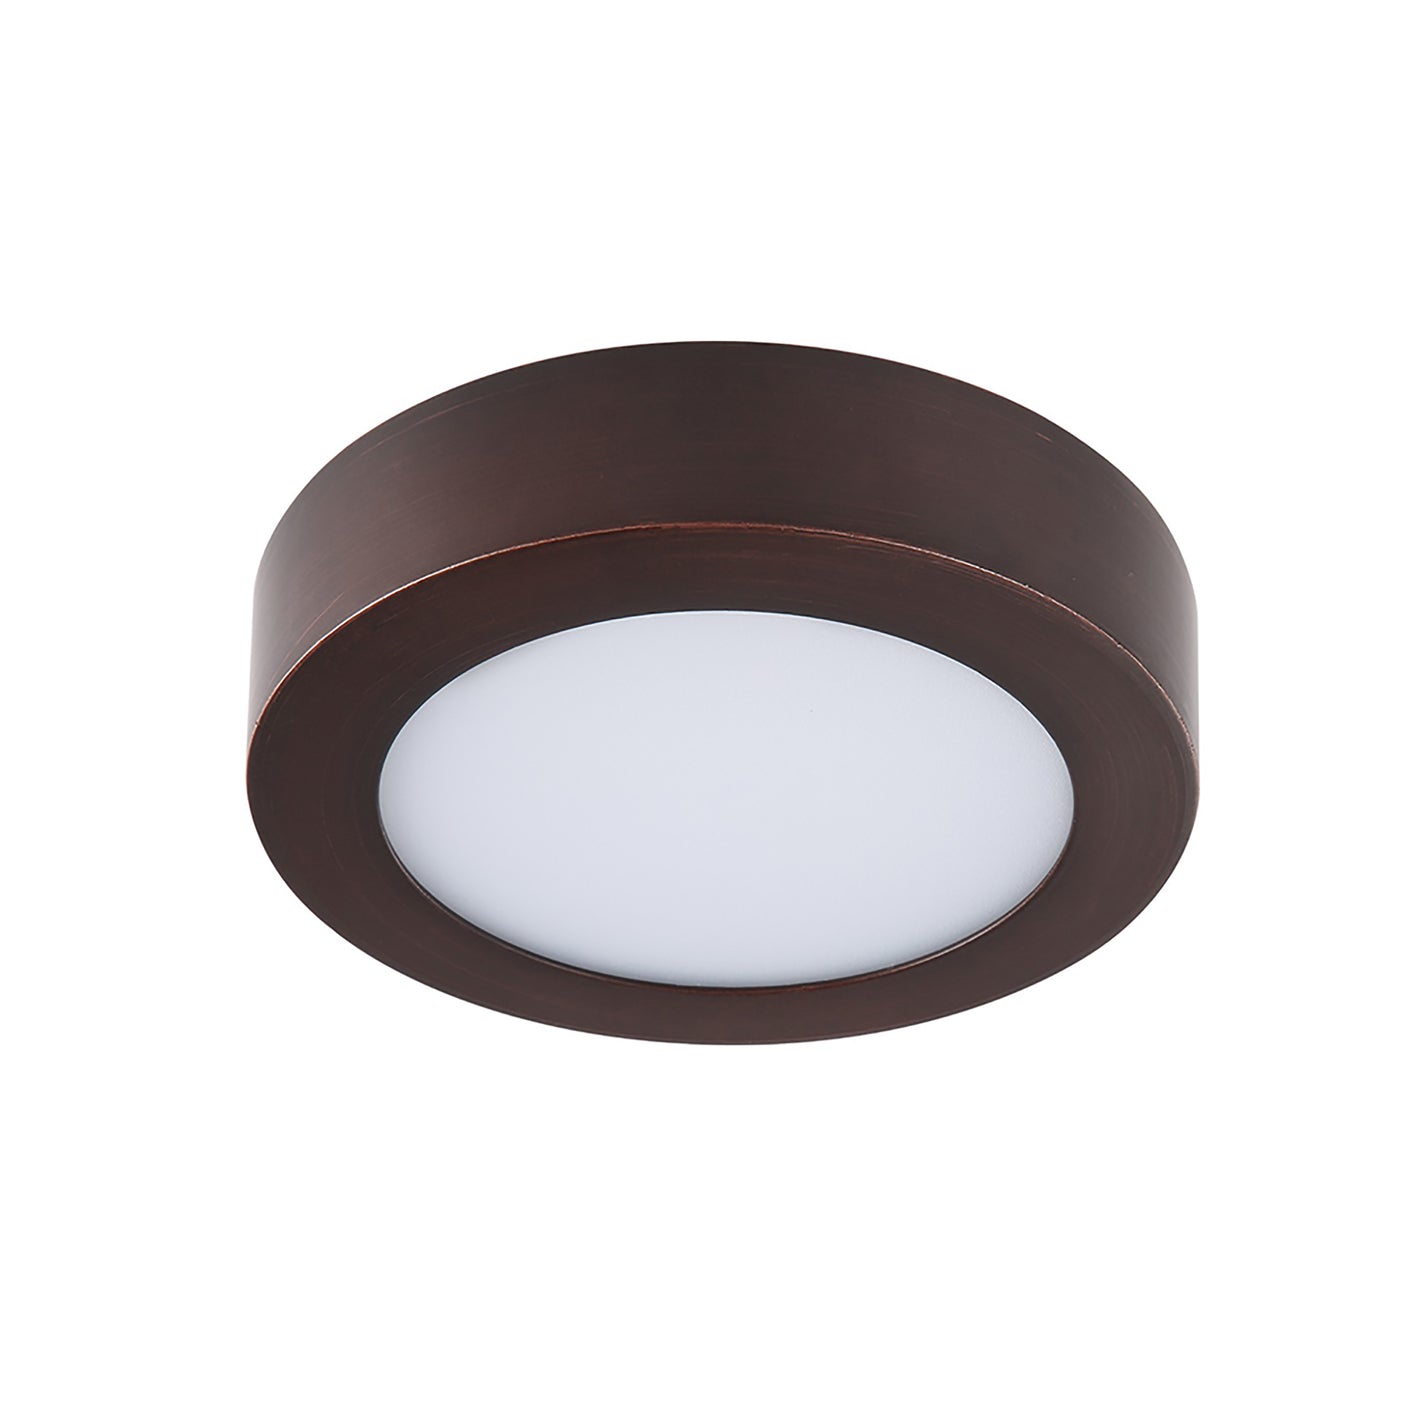 7 Inch 5CCT Color Selectable Surface Mount Panel Light Fixture, Bronze Finish